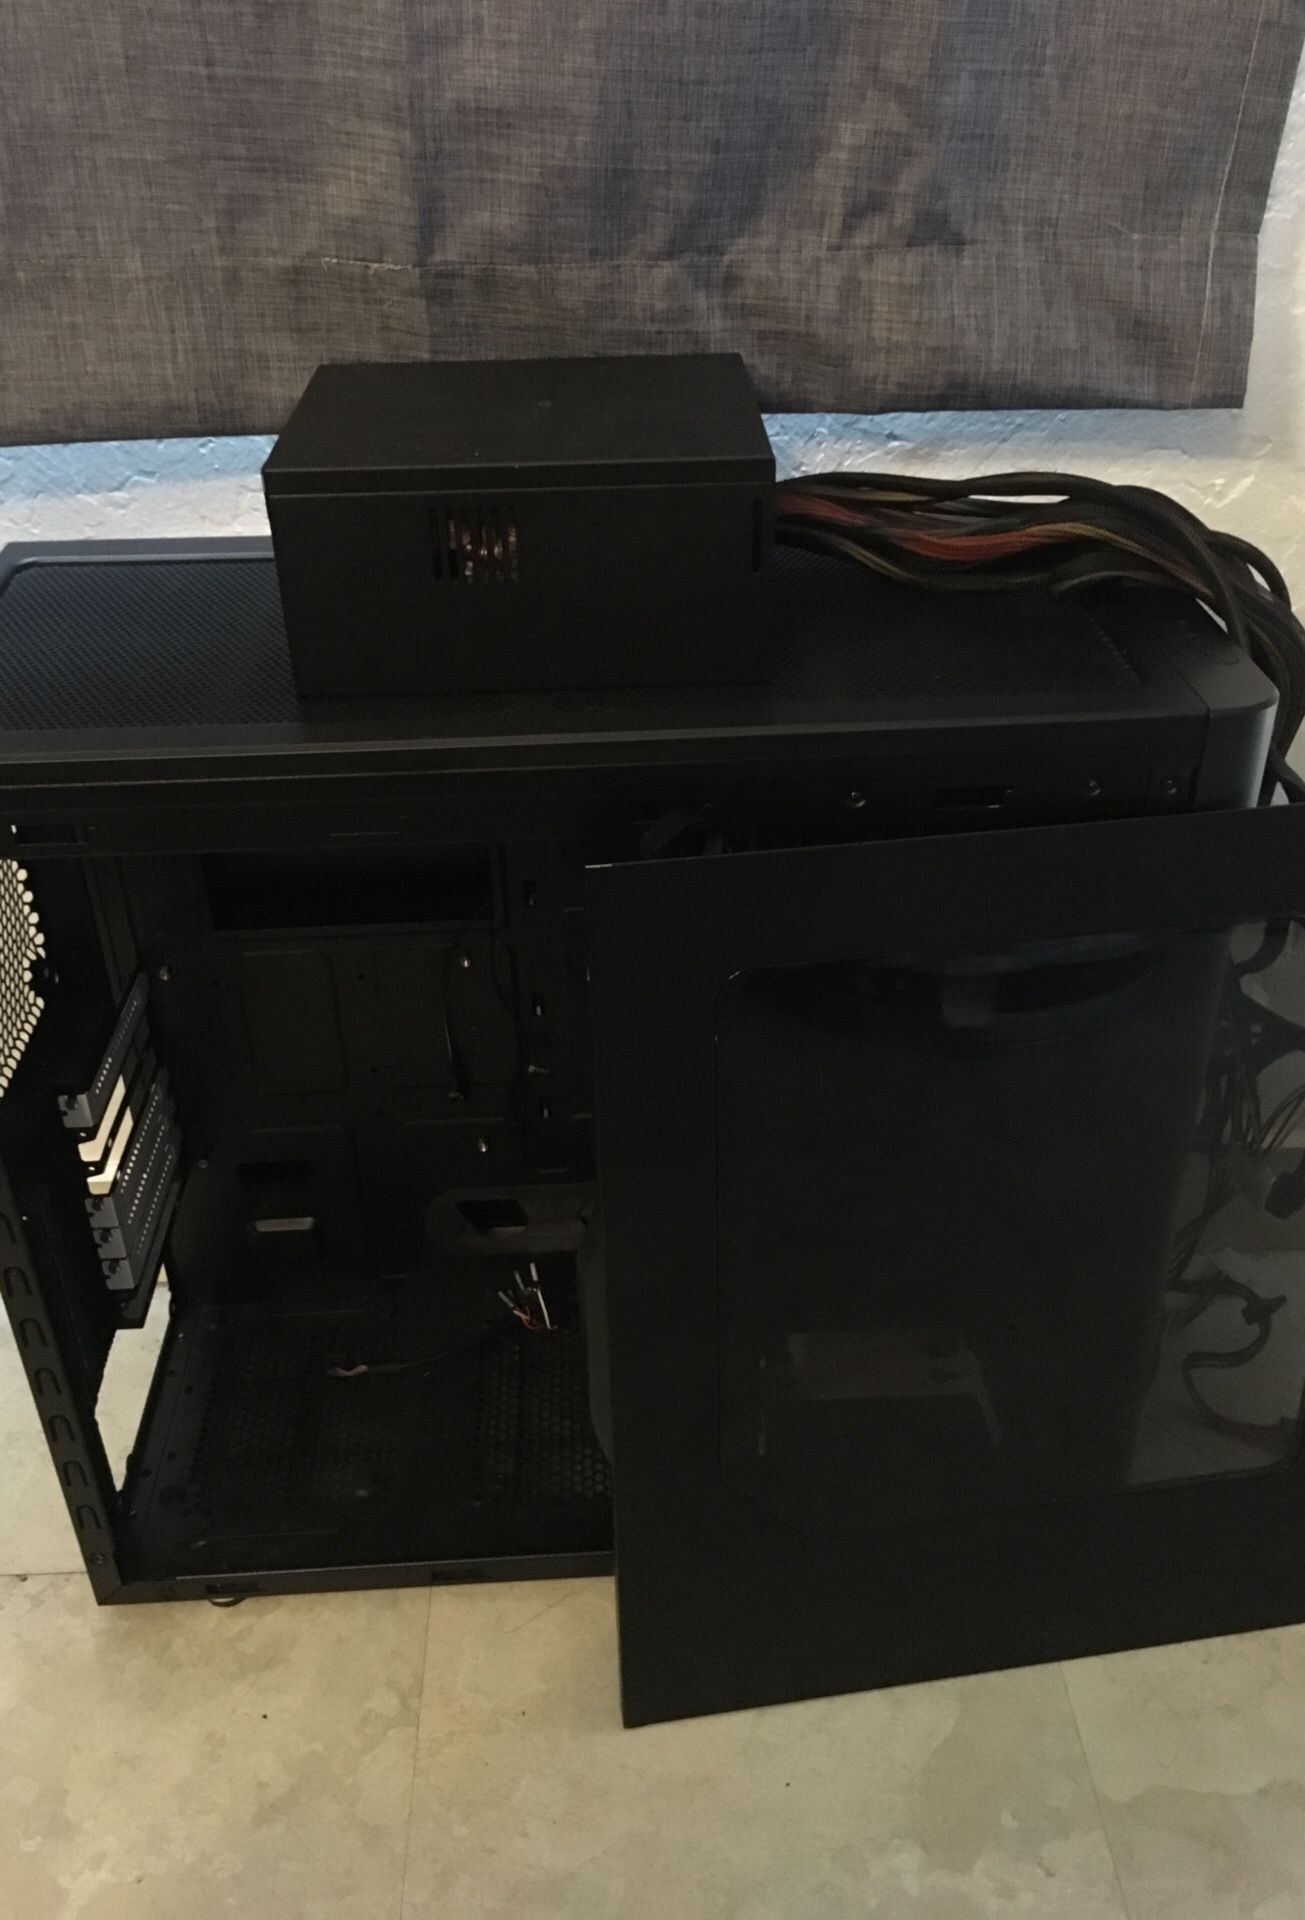 Fractal case and power supply